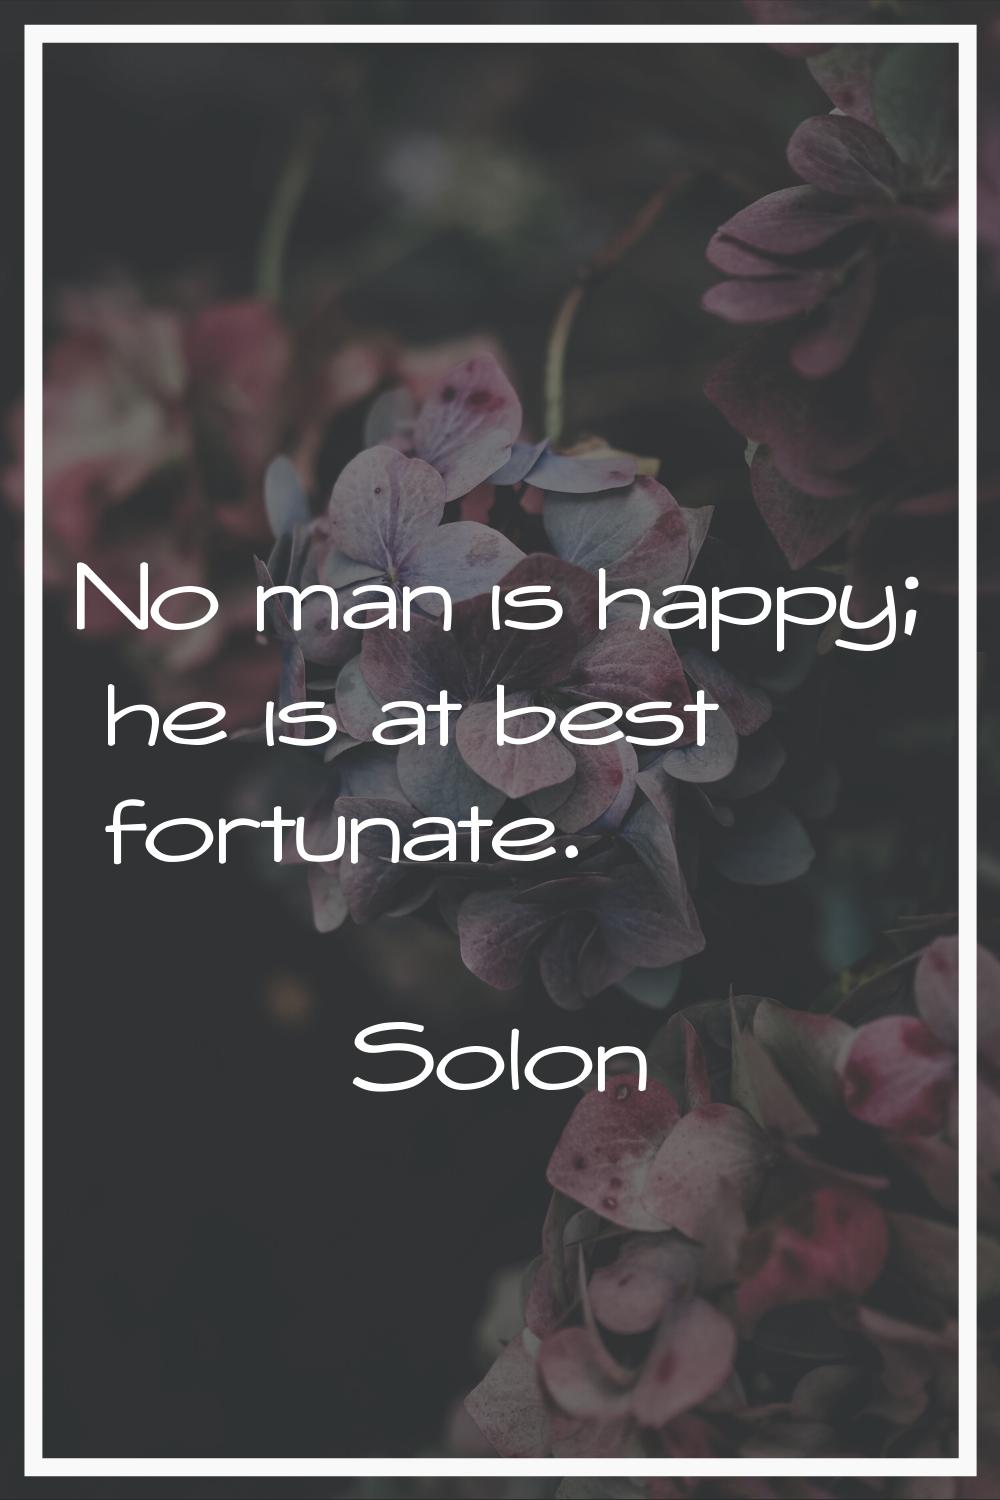 No man is happy; he is at best fortunate.